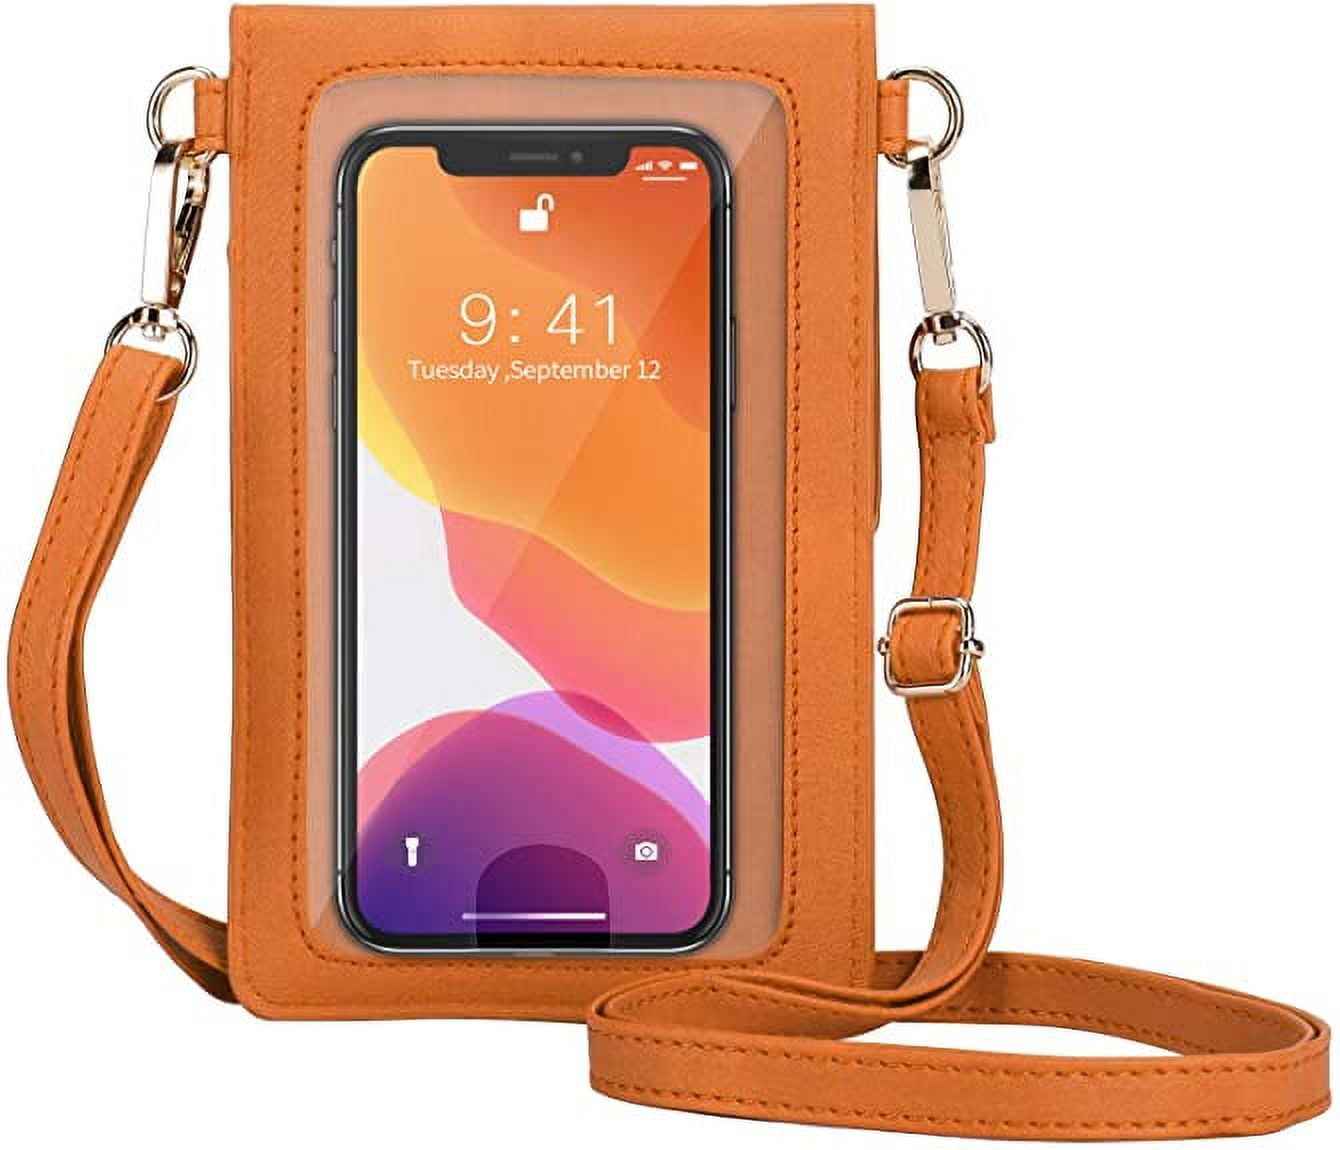 AnsTOP Touch Screen Cell Phone Purse Lightweight Shoulder Wallet PU Leather Phone Case Bag for Women Orange 9fe07879 3826 48c2 a05c 06e7cc10c0f3.5acda035c435e8b1d493caf73e499091